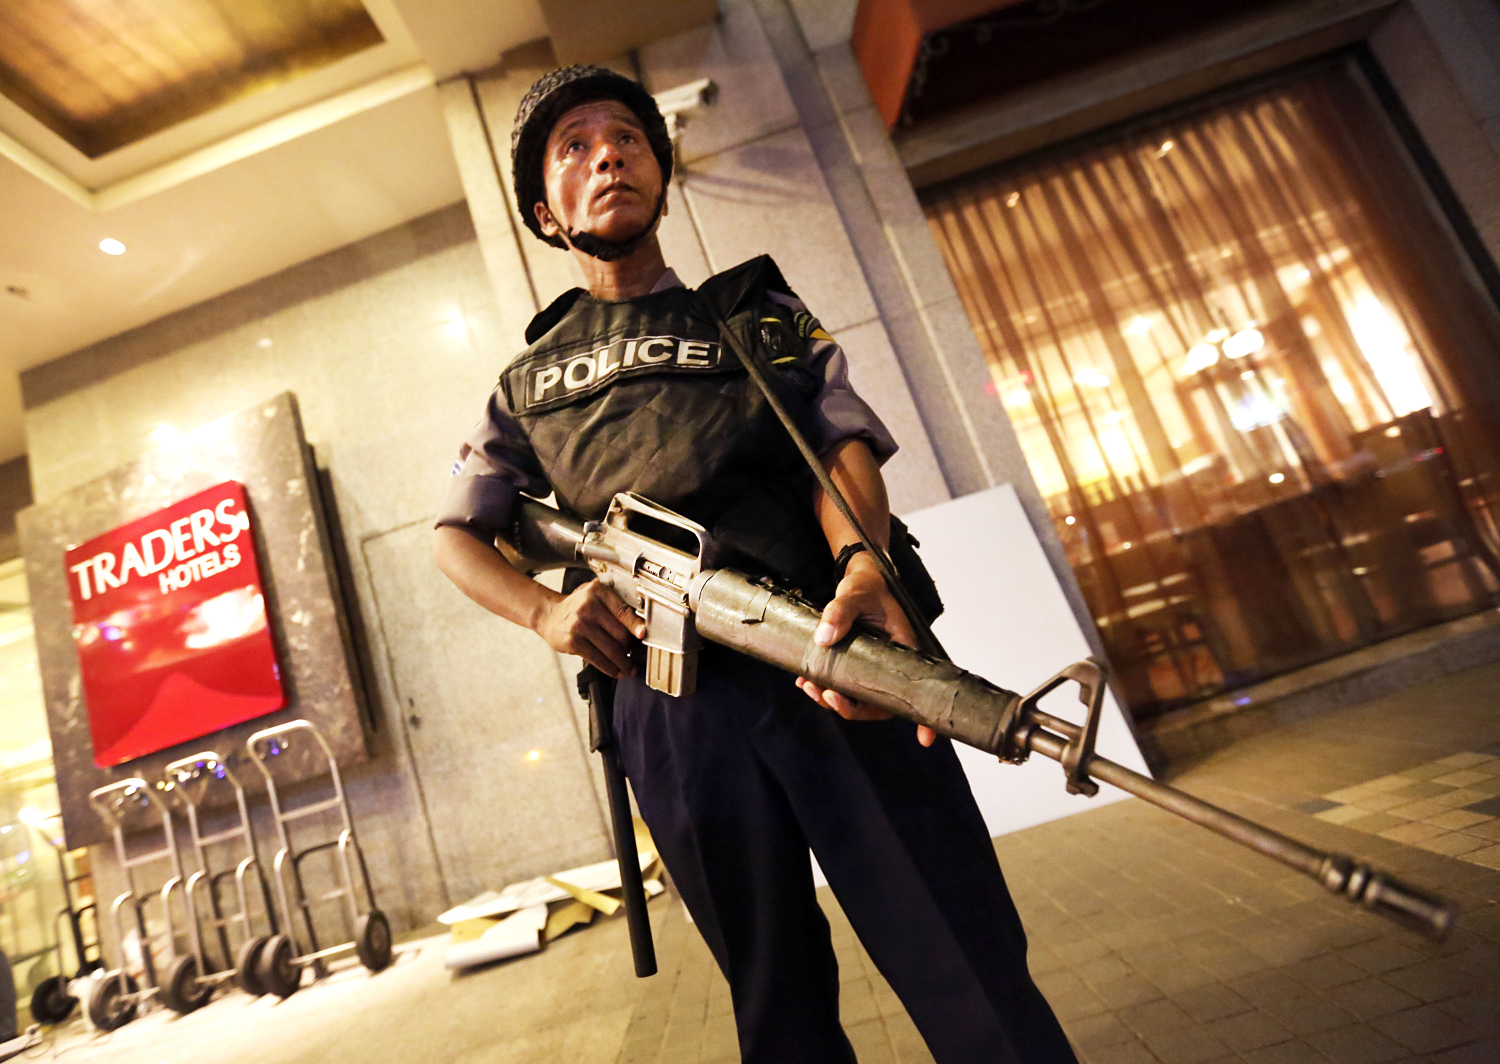 A Myanmar policeman stands guard in front of the Traders Hotel after an explosion in Yangon. Photo: Xinhua